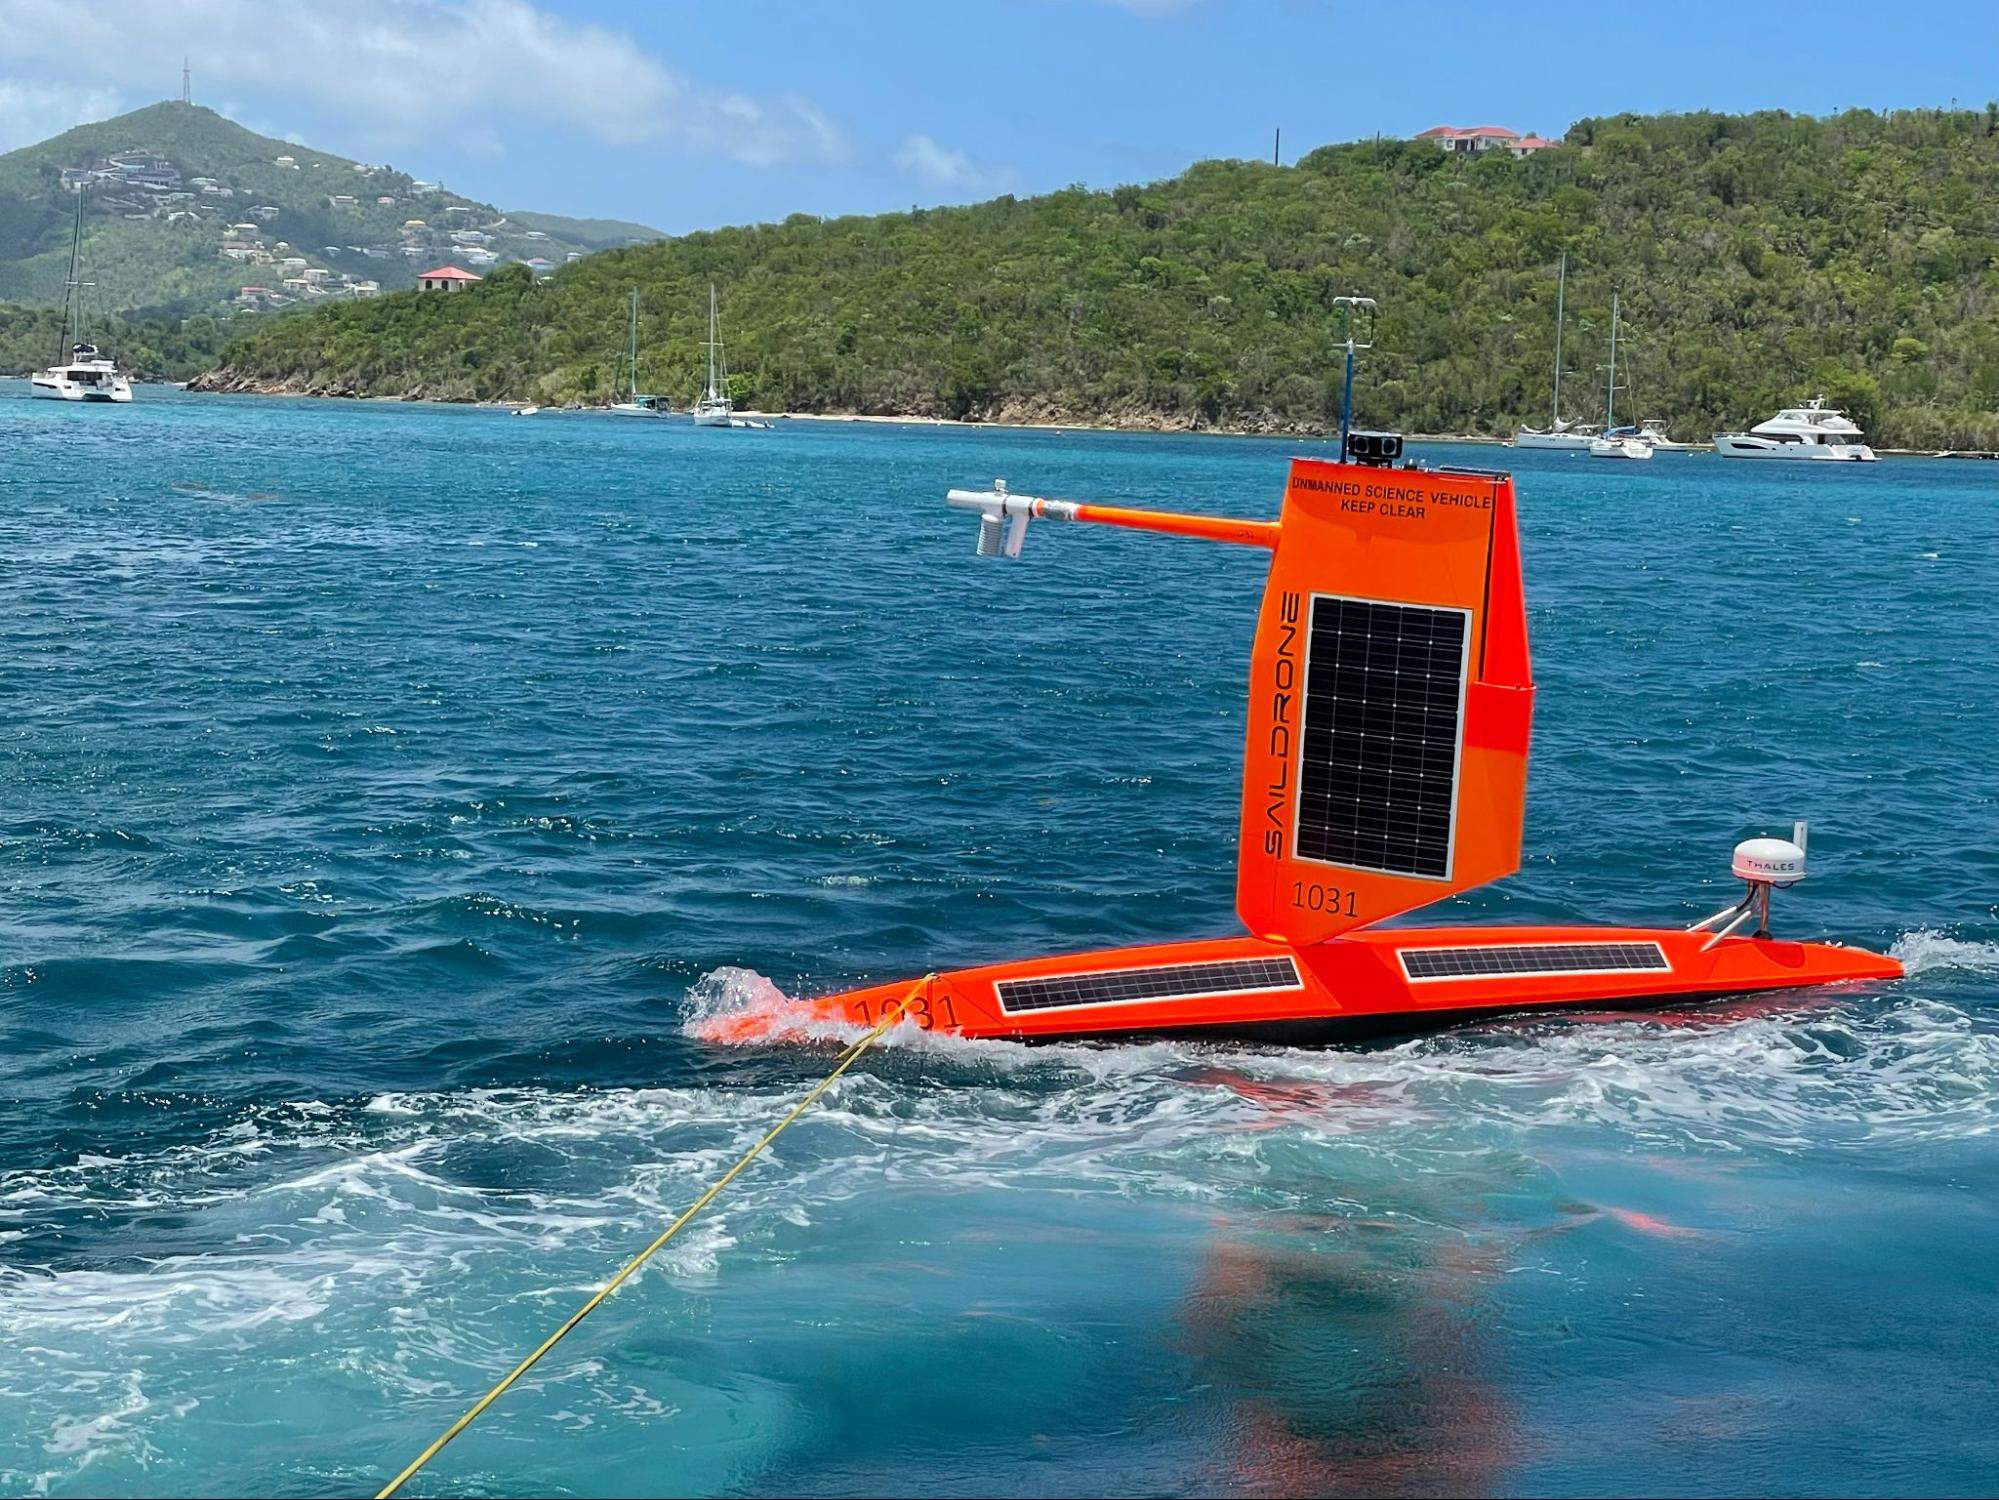 Red autonomous glider in the shape of a surfboard with a sail is connected to a towline for deployment